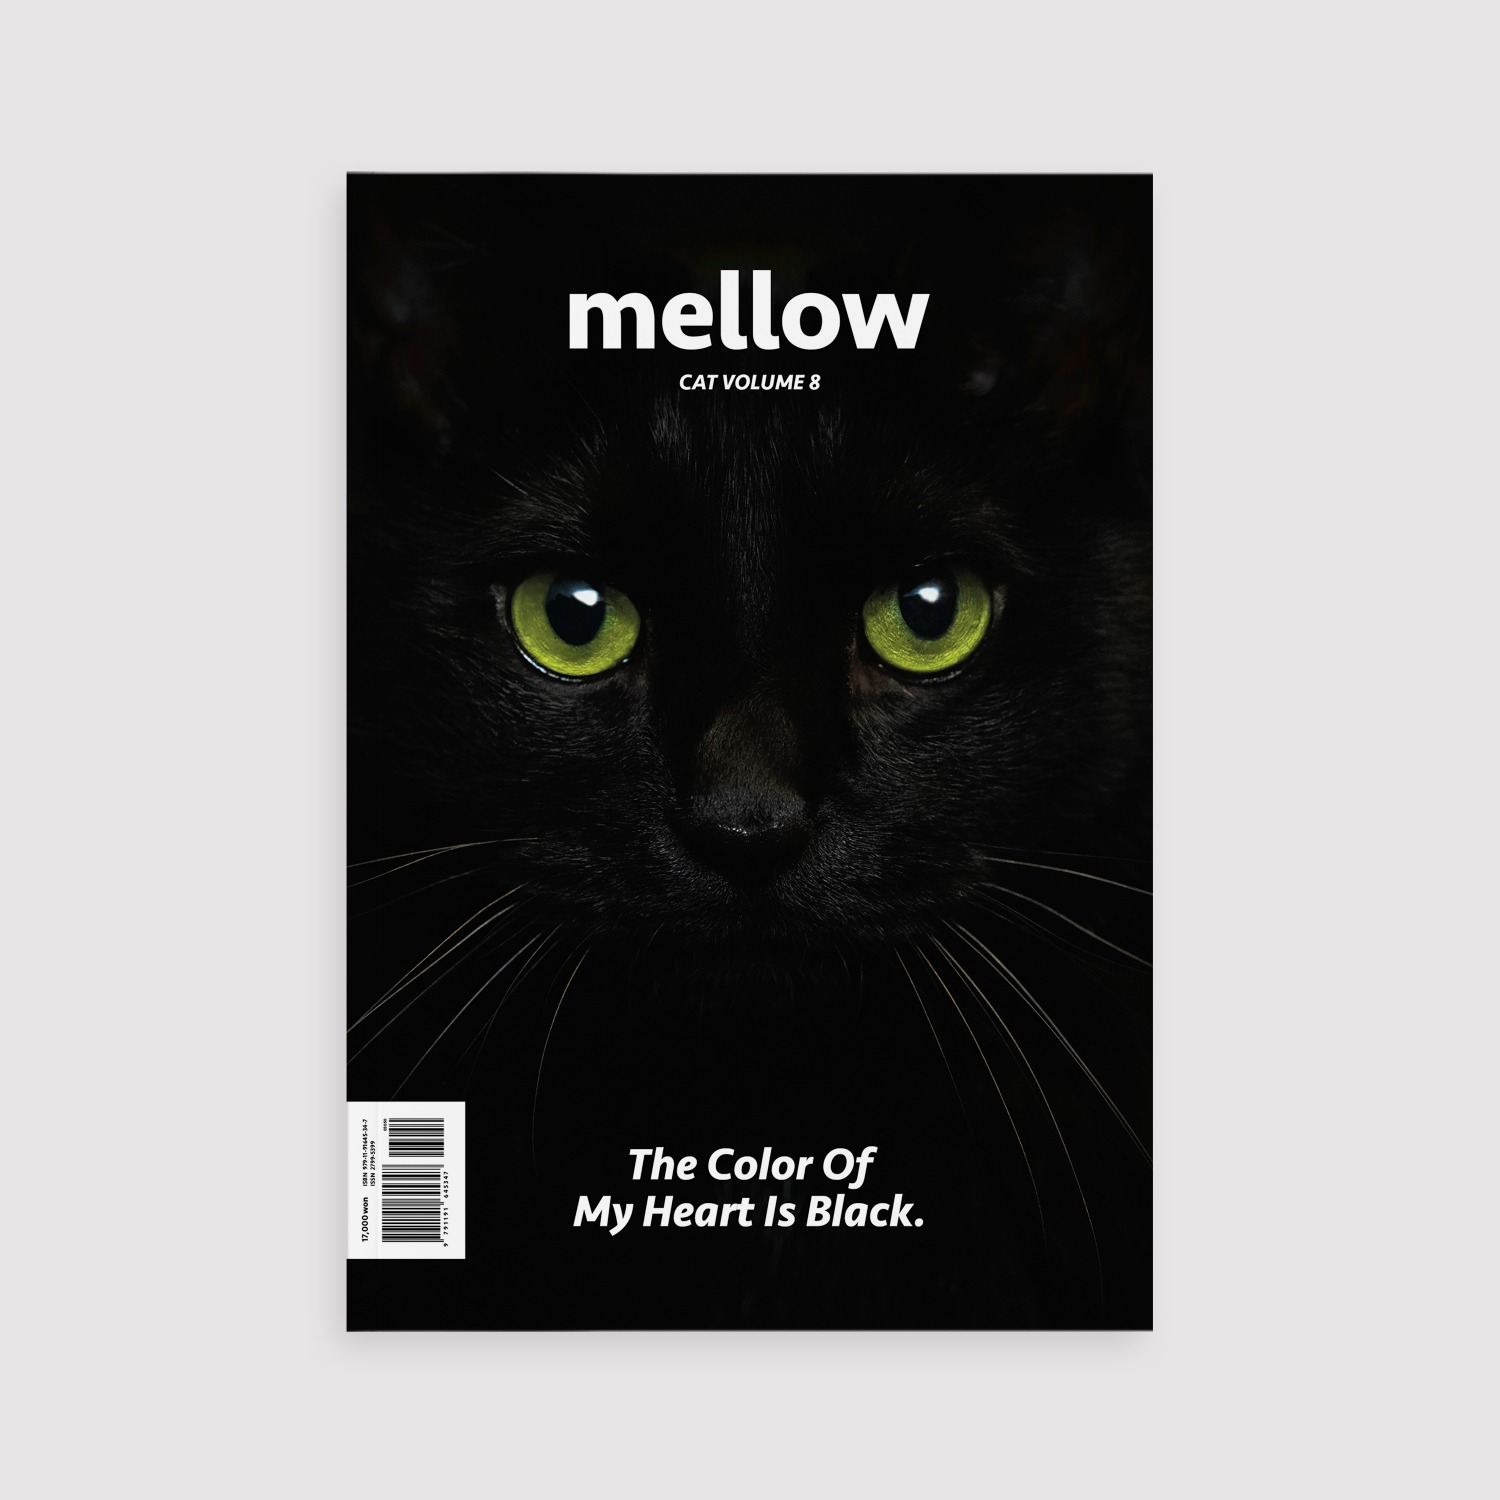 [ Vol.8 ] mellow cat / The Color Of My Heart Is Black.